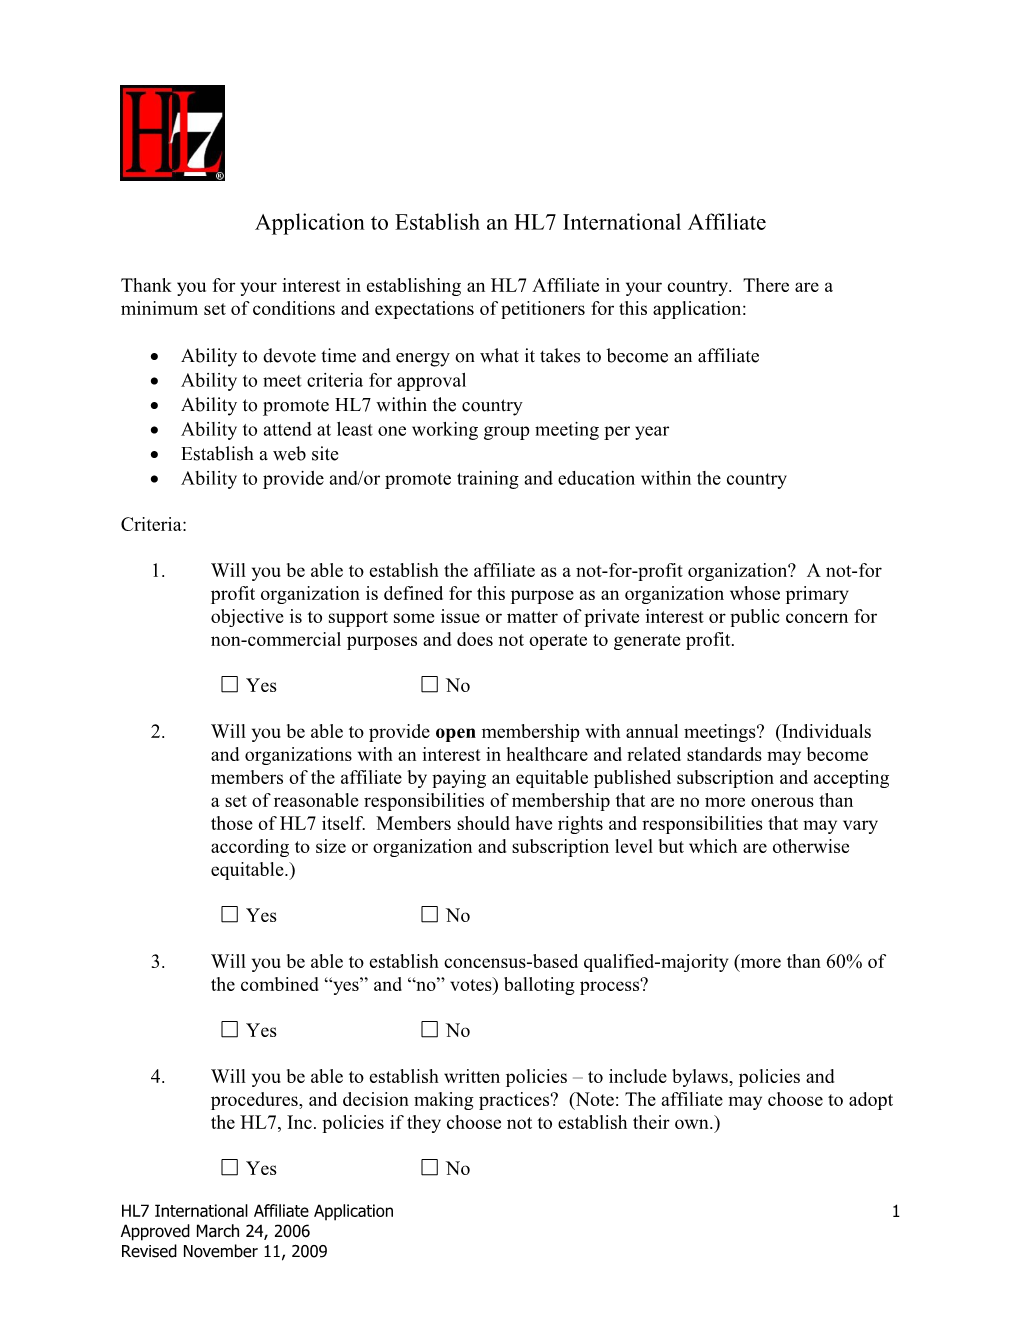 Application to Form an HL7 International Affiliate